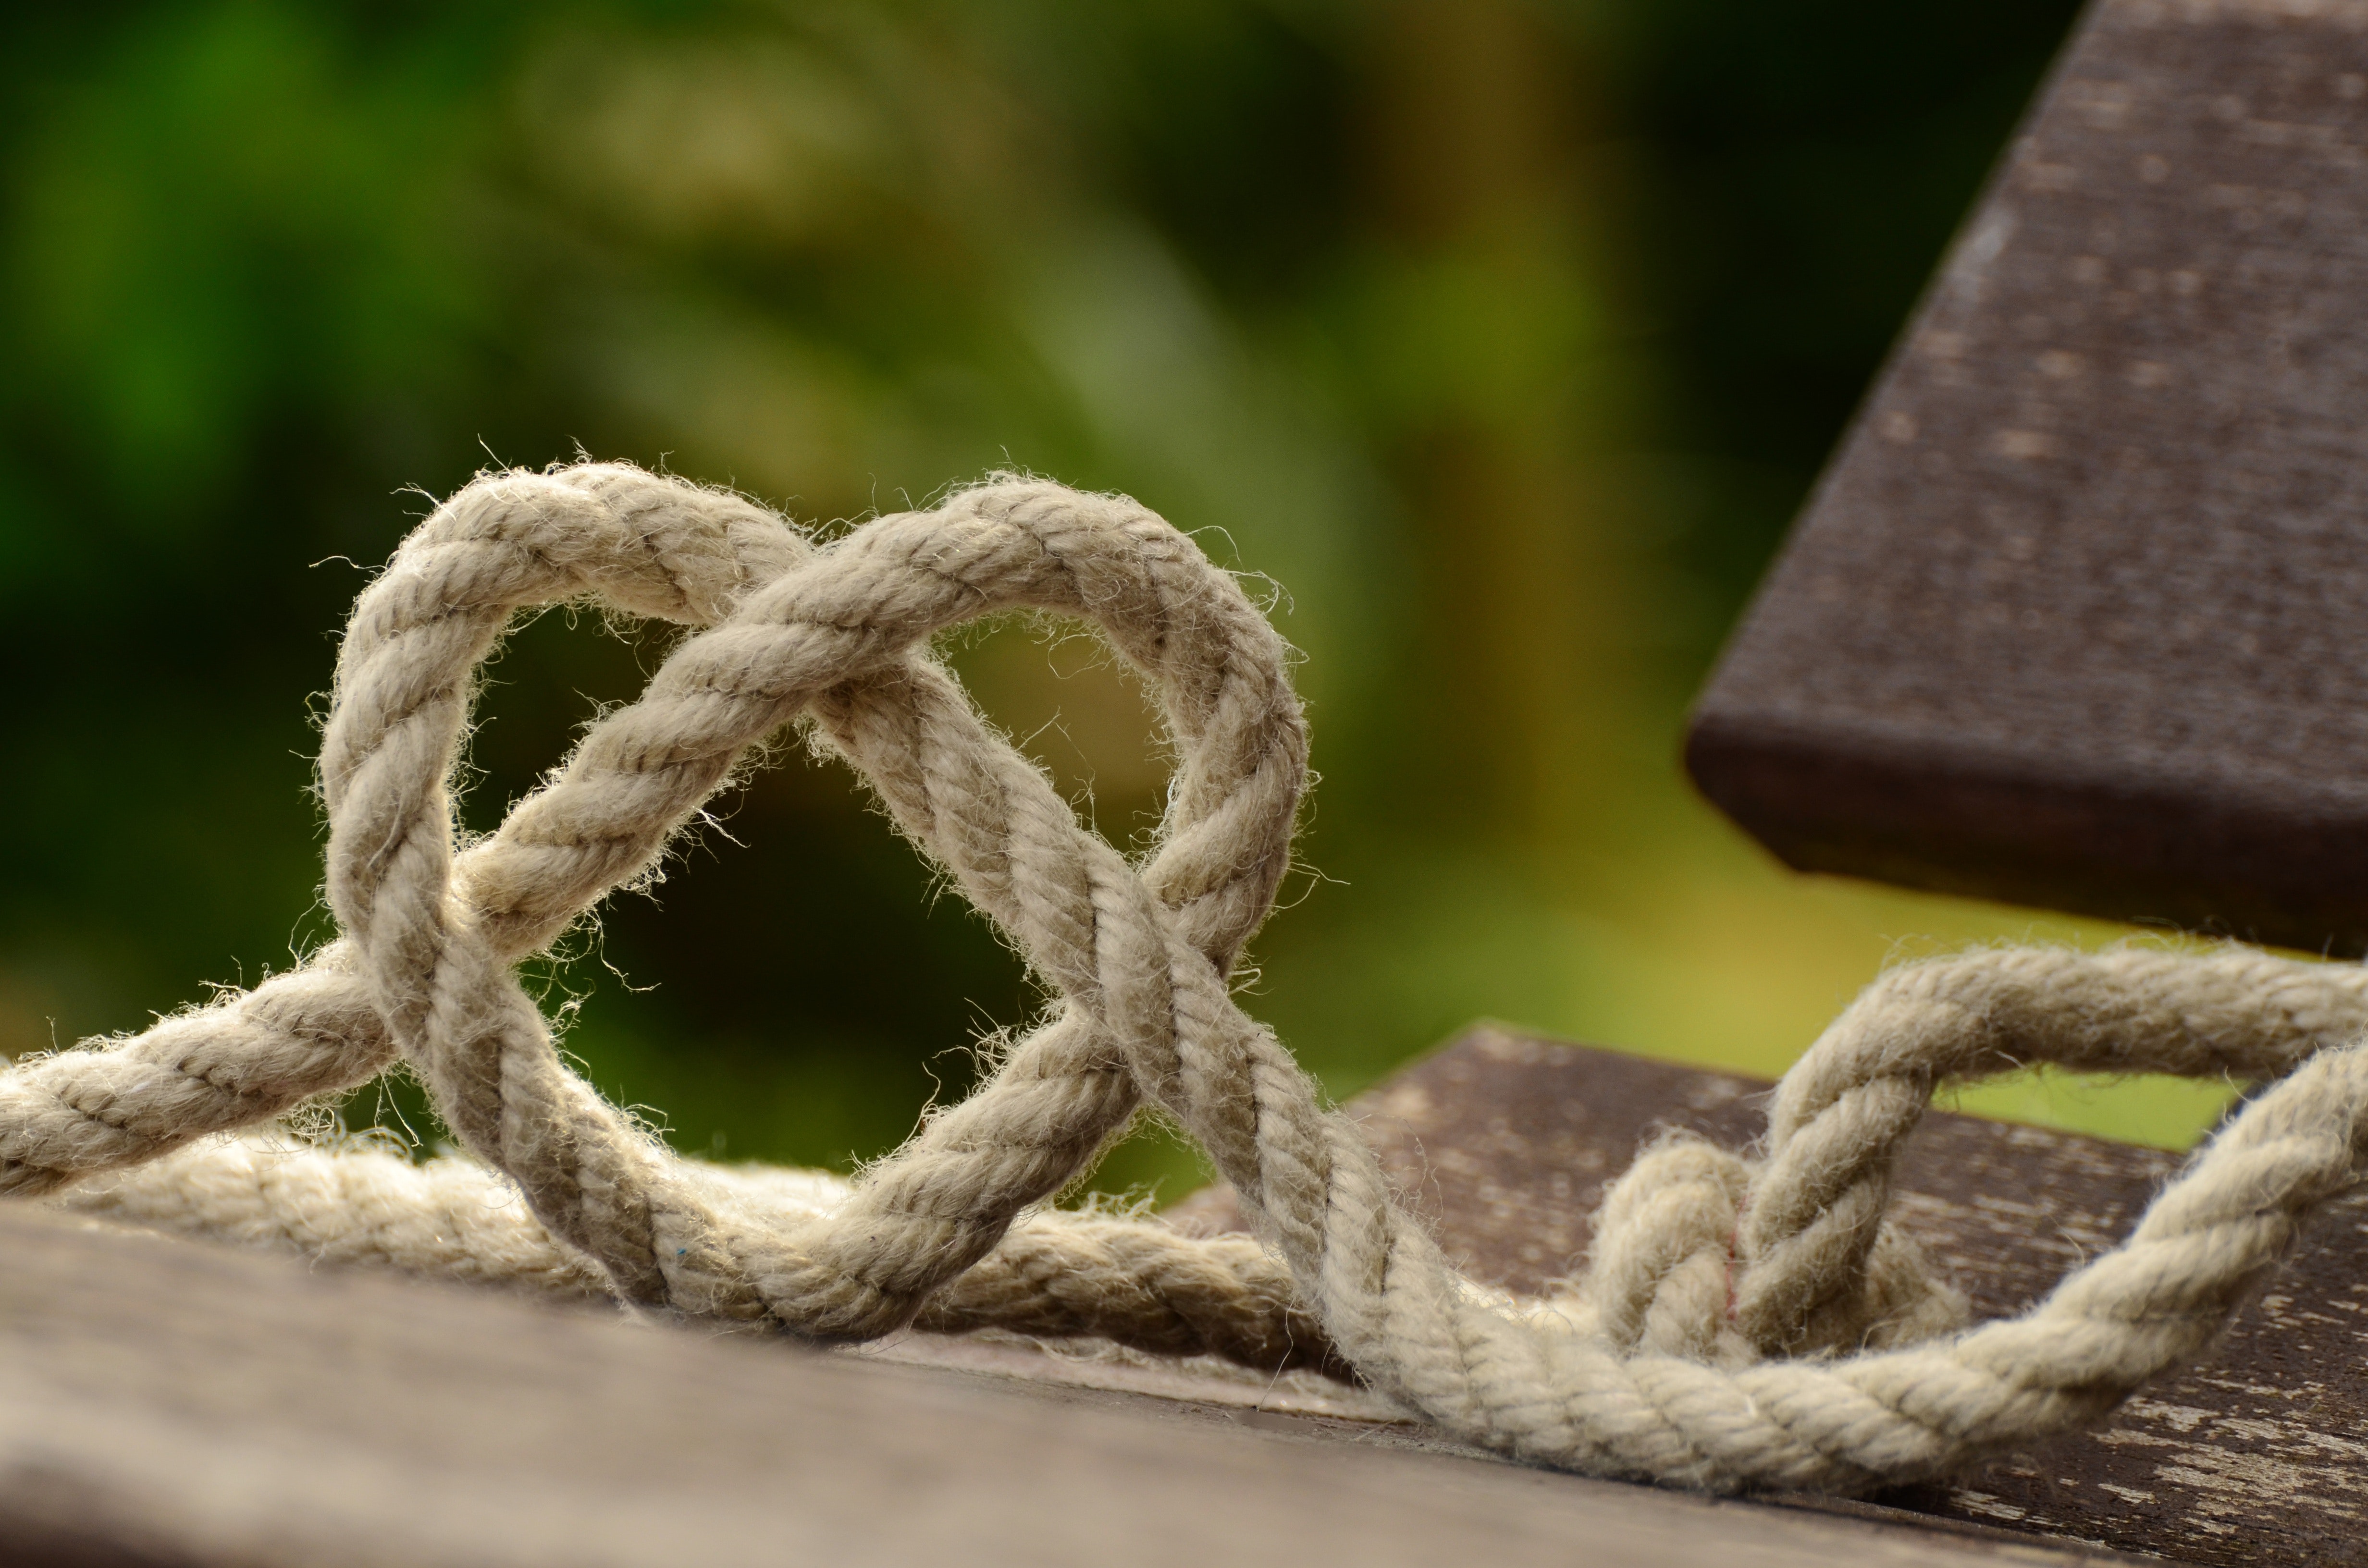 brown-rope-tangled-and-formed-into-heart-shape-on-brown-113737.jpg